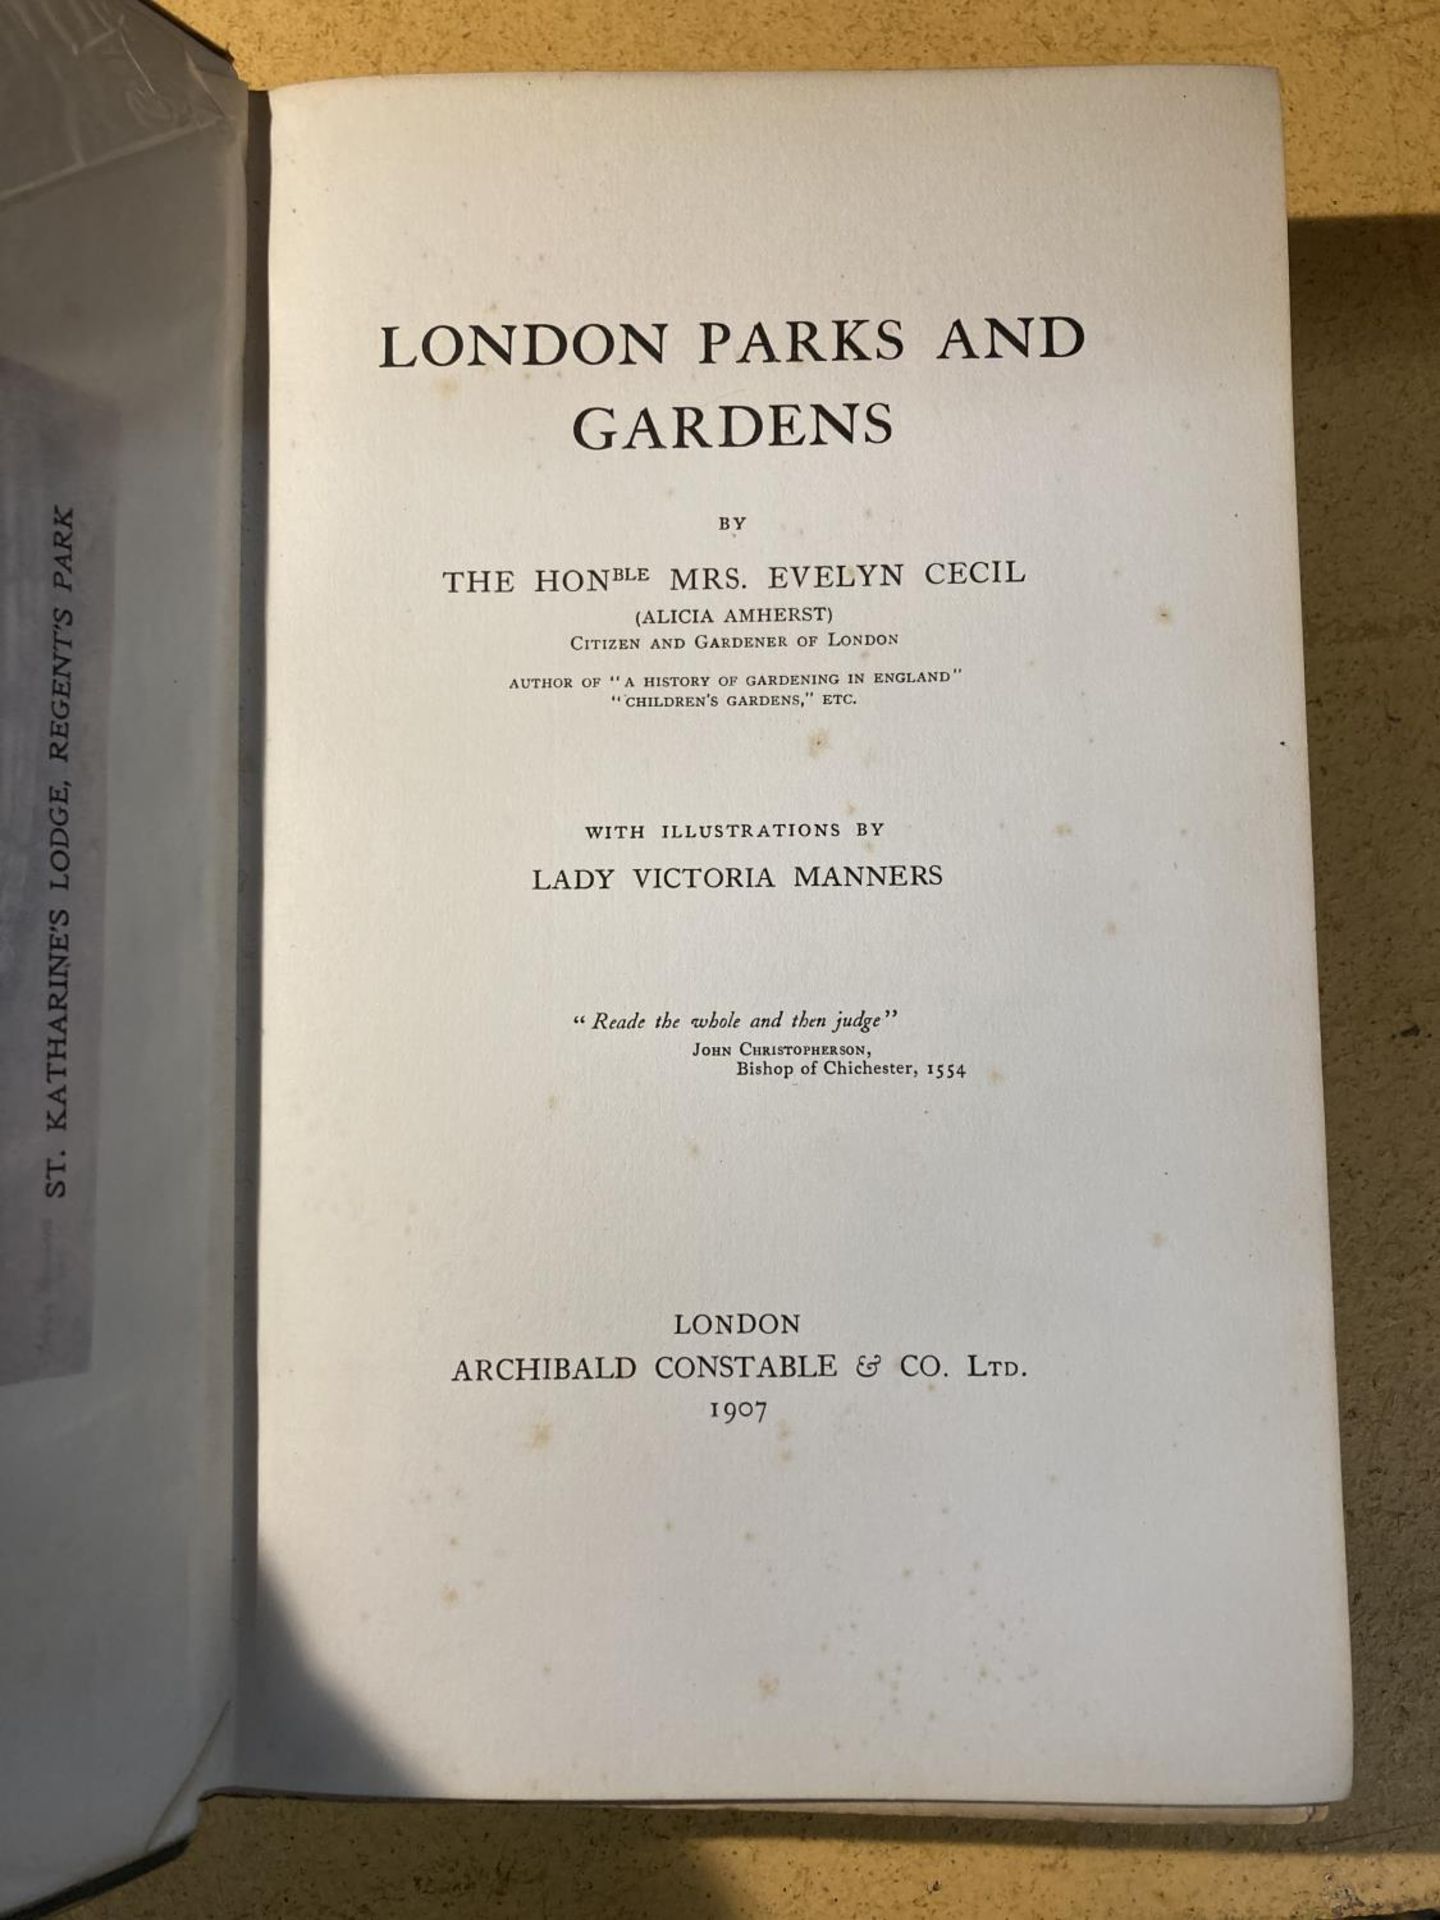 A 1ST EDITION LONDON PARKS AND GARDENS - EVELYN CECIL - 1907 GILT ILLUSTRATED BOARDS, WITH CLEAR - Image 4 of 4